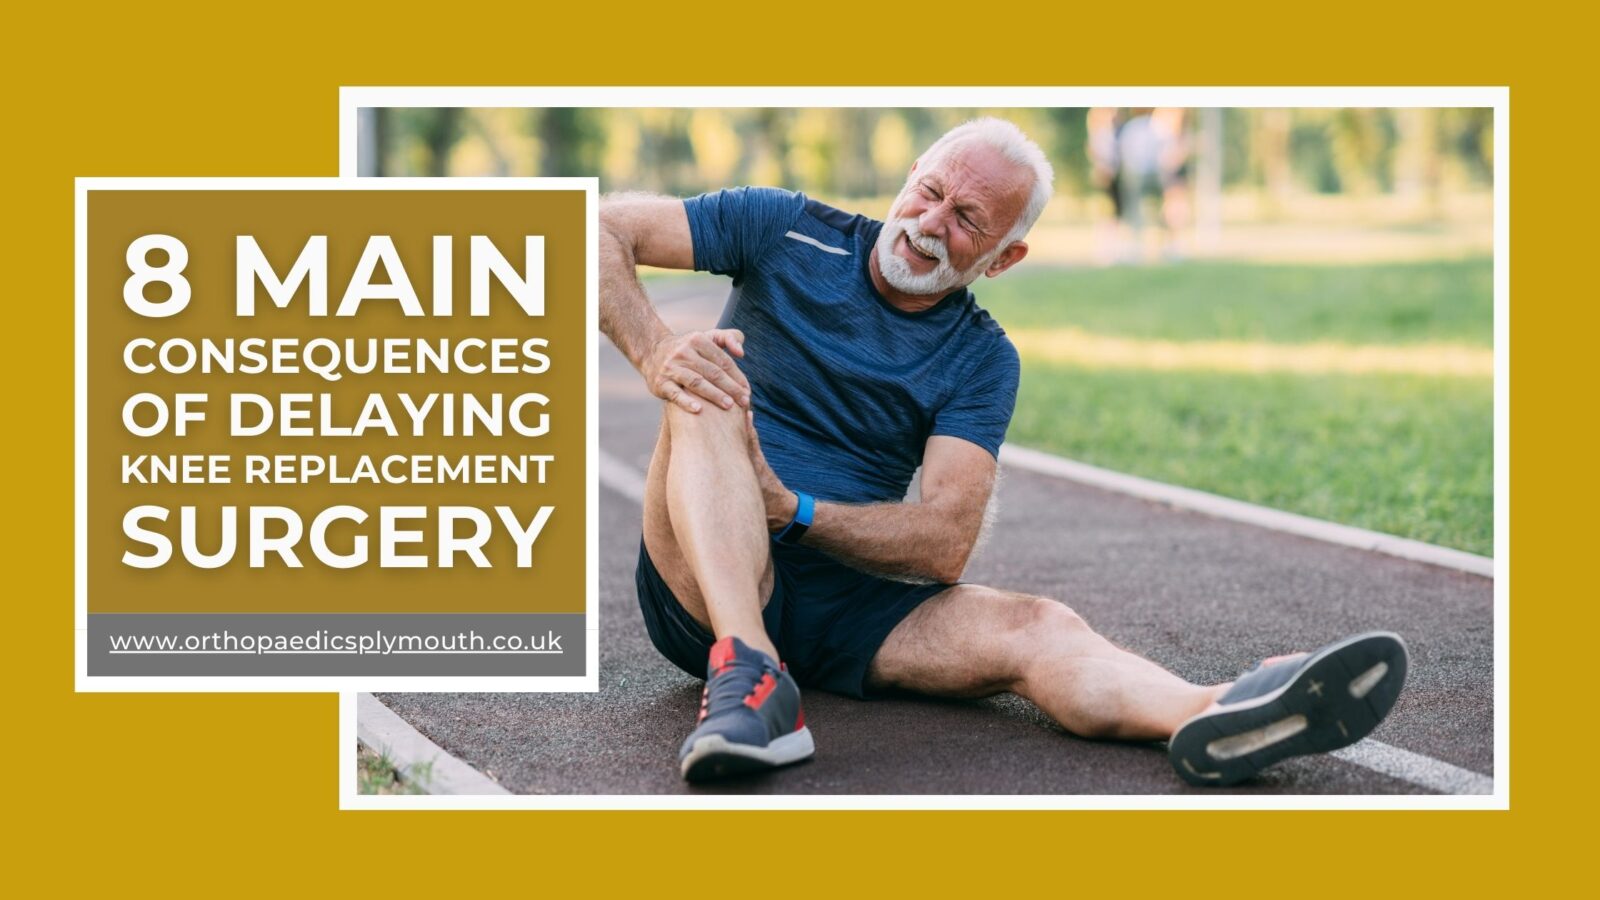 8 main consequences of delaying knee replacement surgery